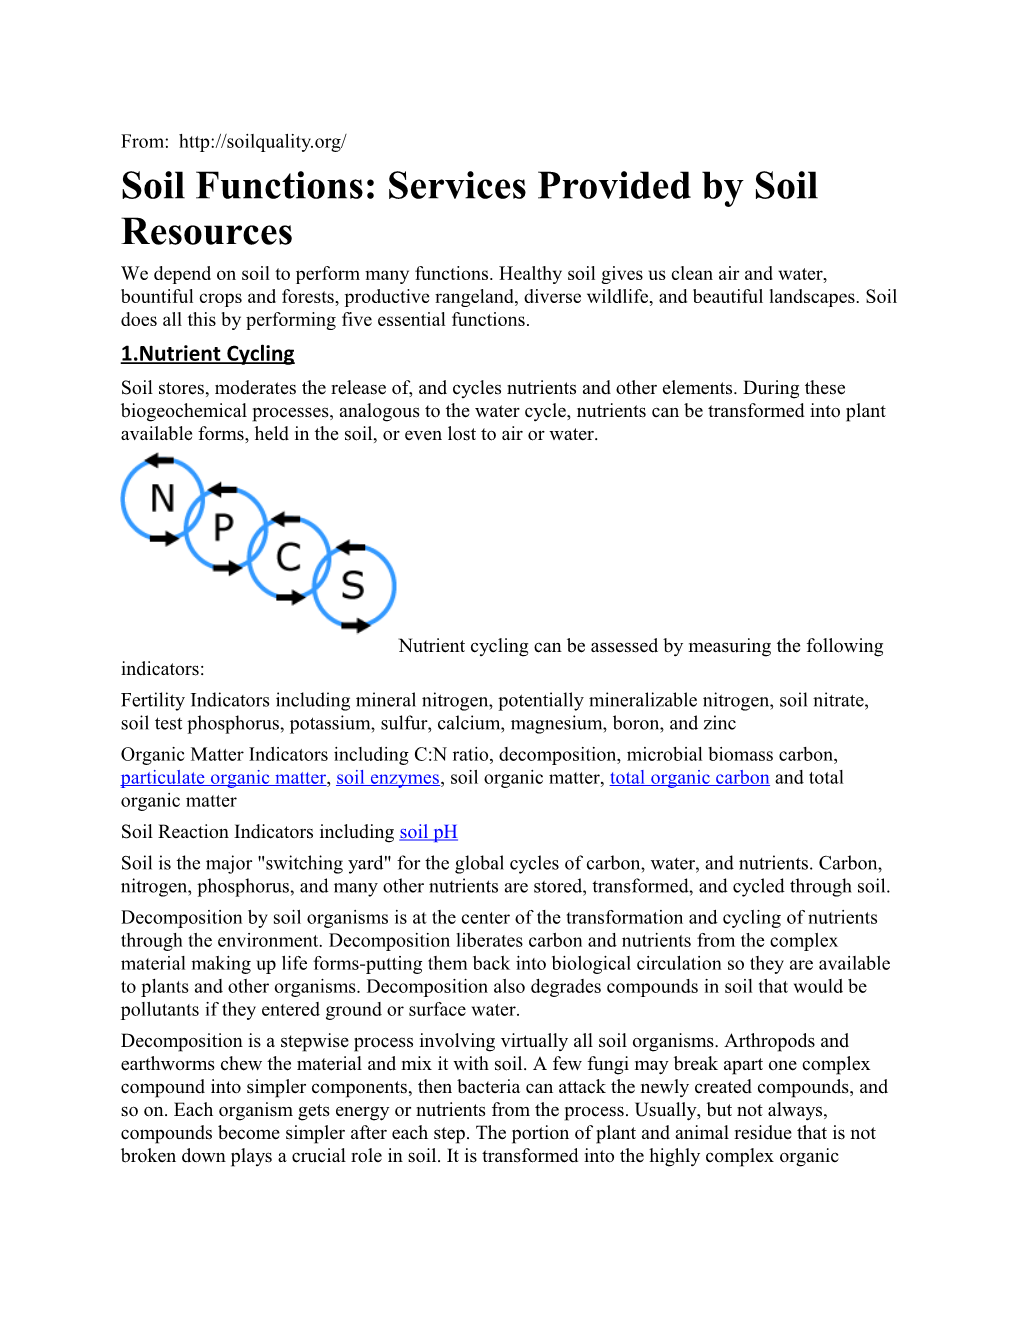 Soil Functions: Services Provided by Soil Resources